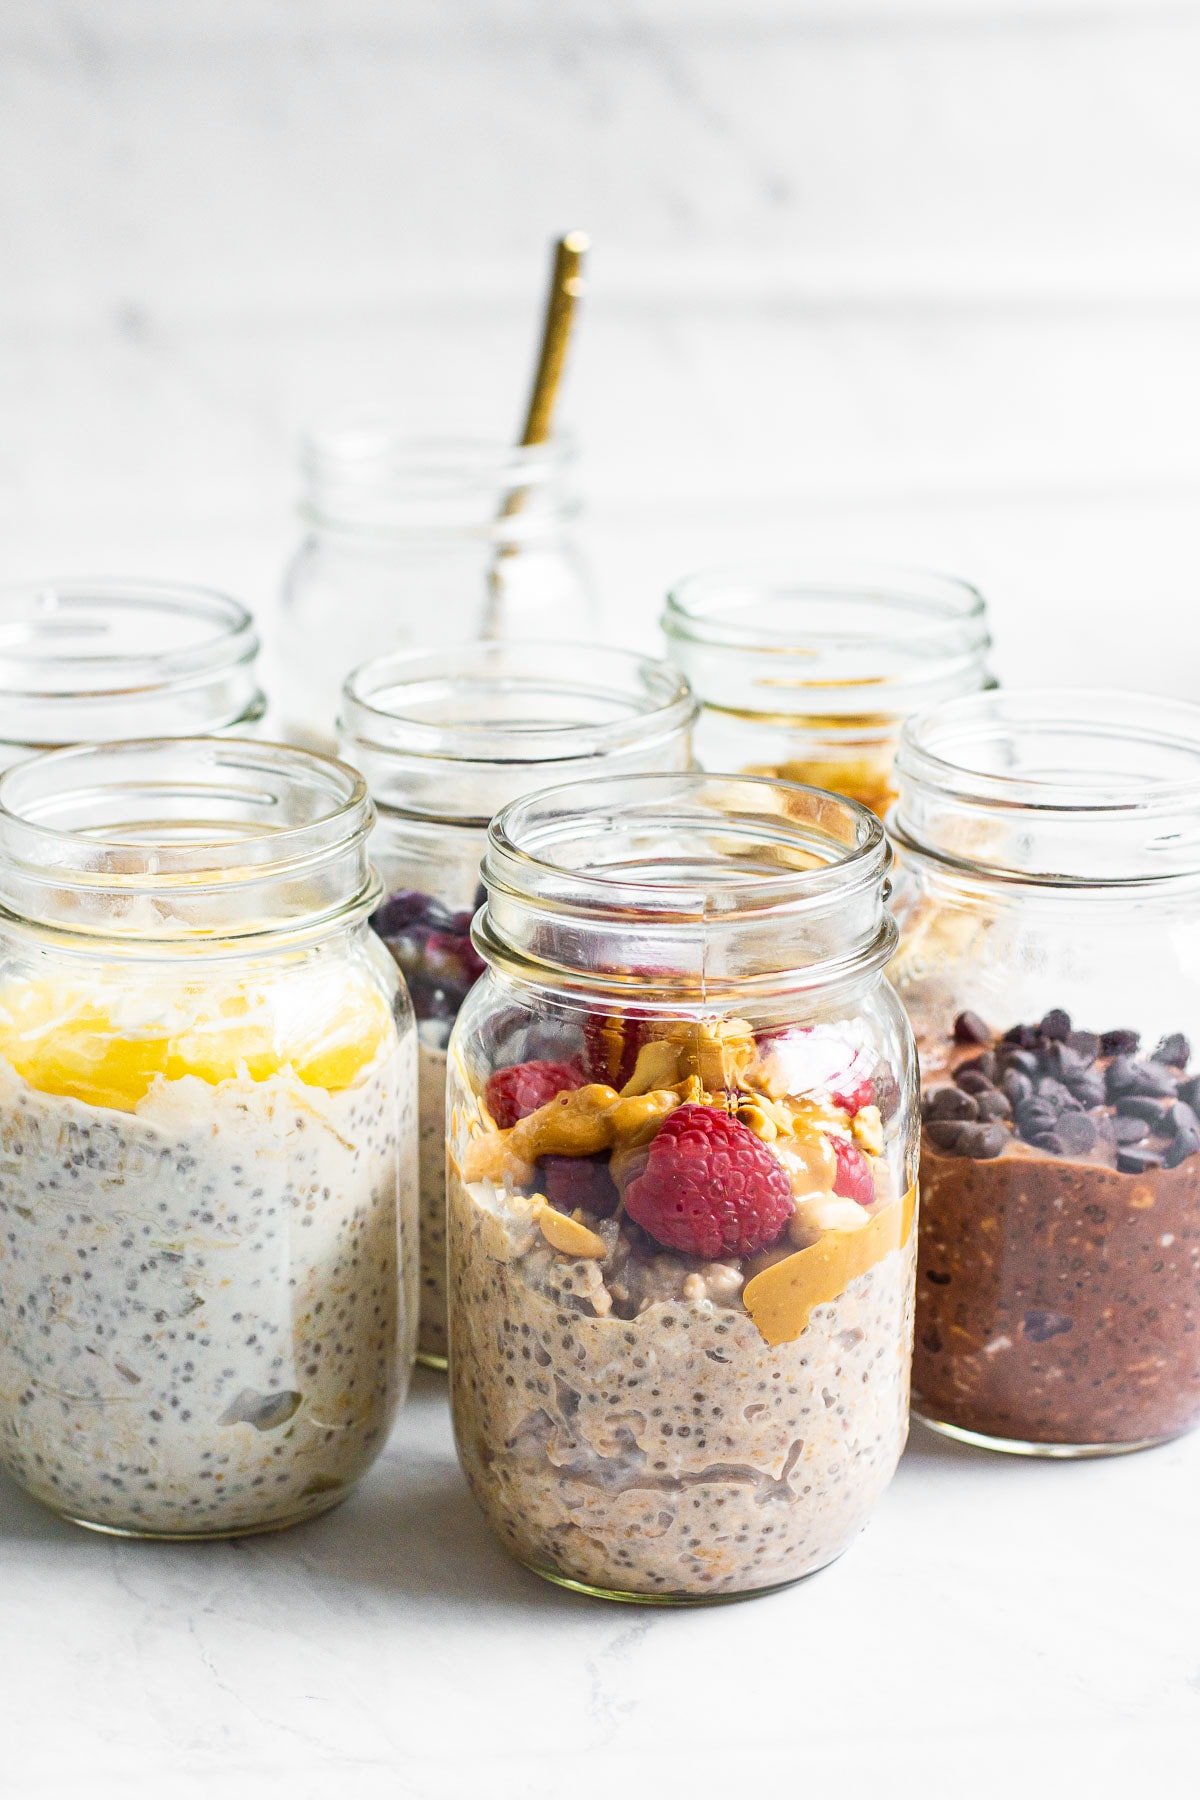 Healthy overnight oats with yogurt, chia seeds and toppings in glass jars.